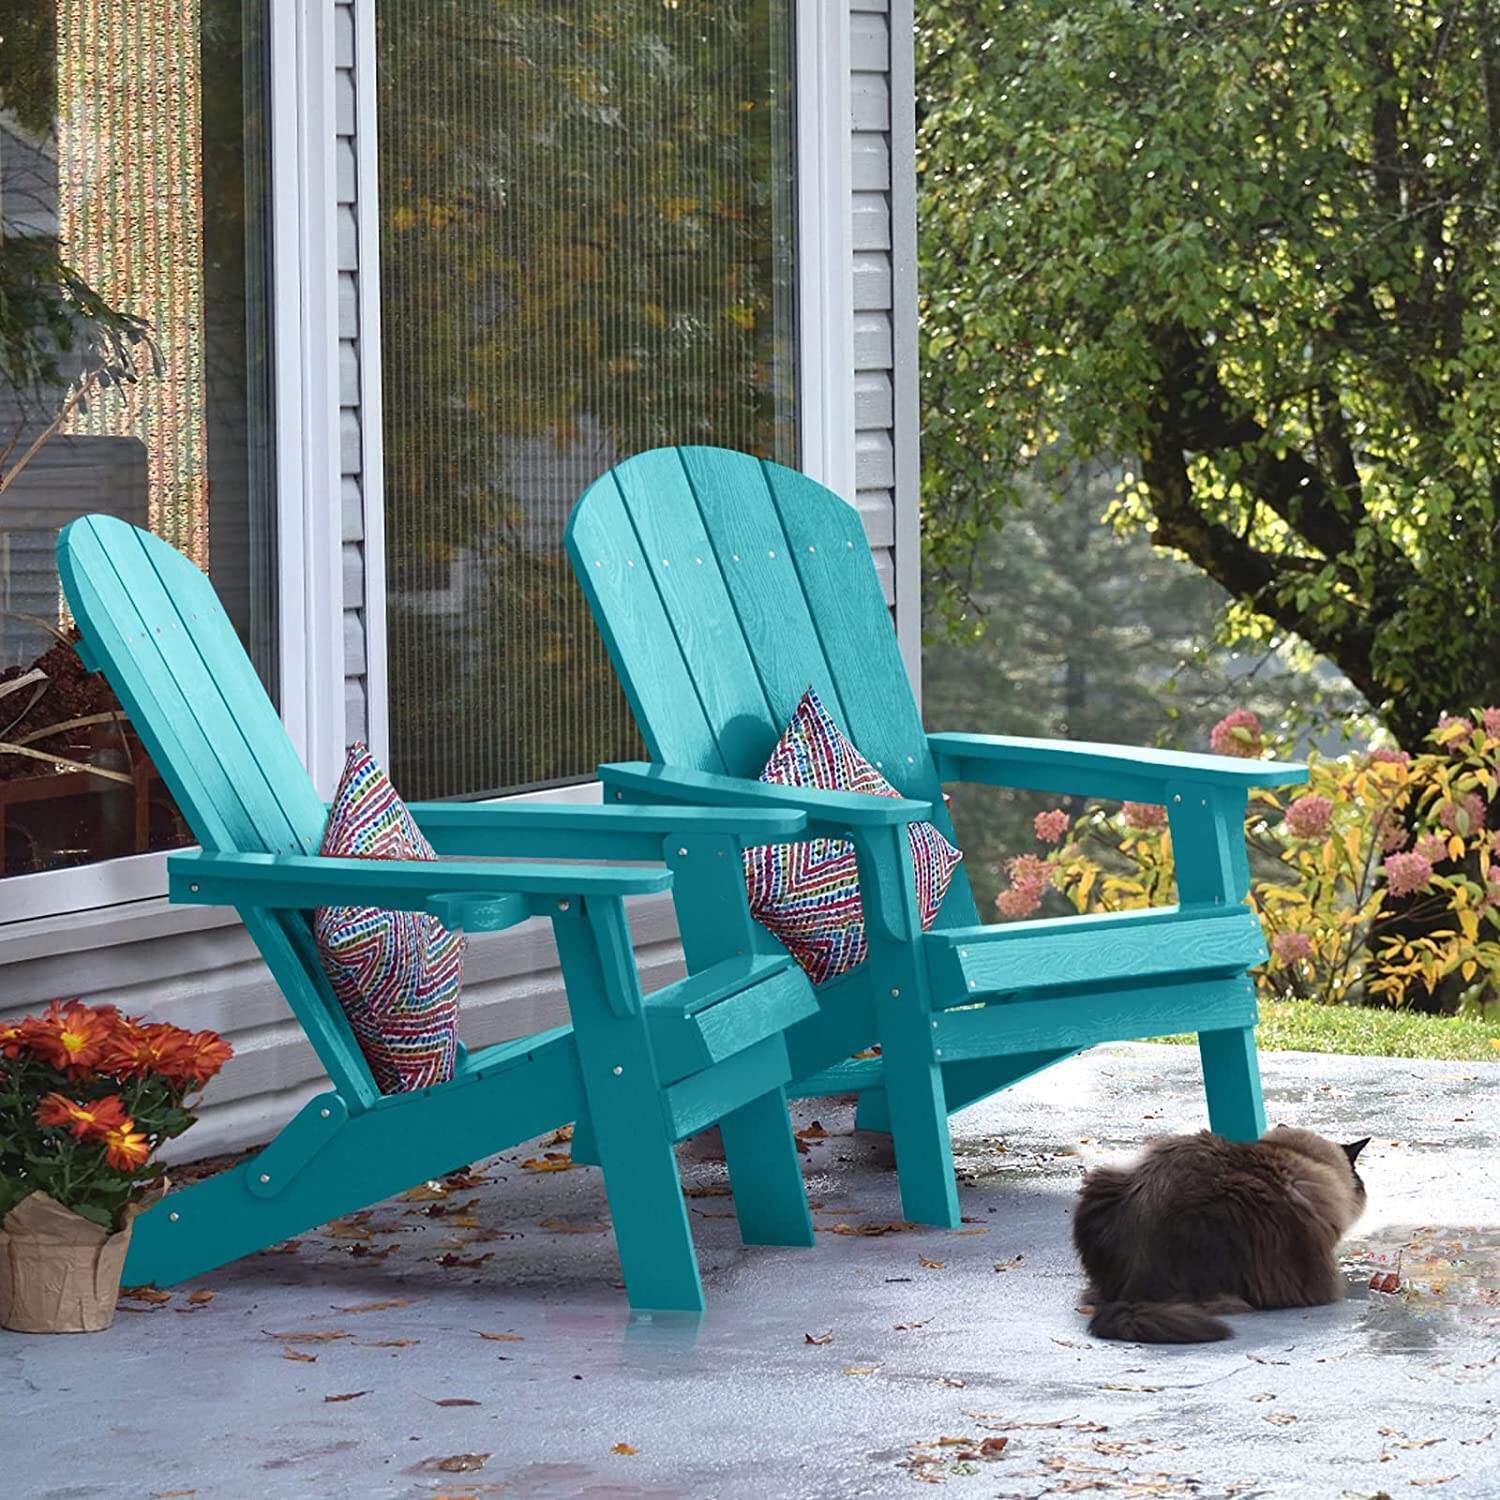 Adirondack Chair .Patio Chairs 5 Steps Easy Installation.Widely Used in Outdoor. Fire Pit. Deck. Outside. Garden. Campfire Chairs